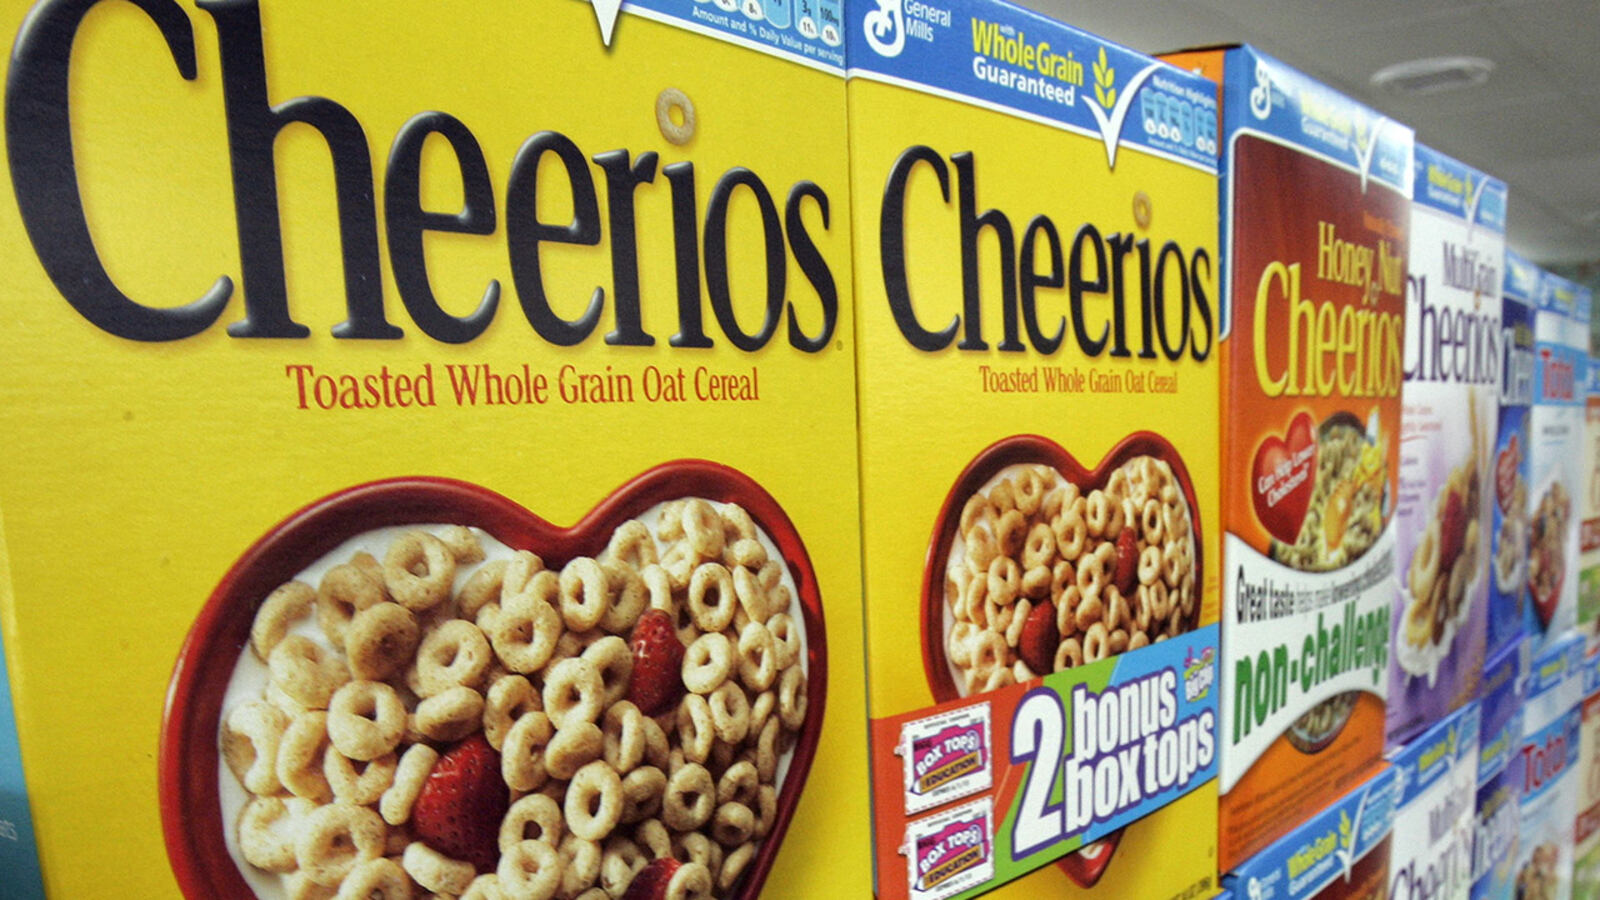 Class-Action Lawsuit Alleges General Mills' Cheerios Contains Harmful Levels Of Pesticide